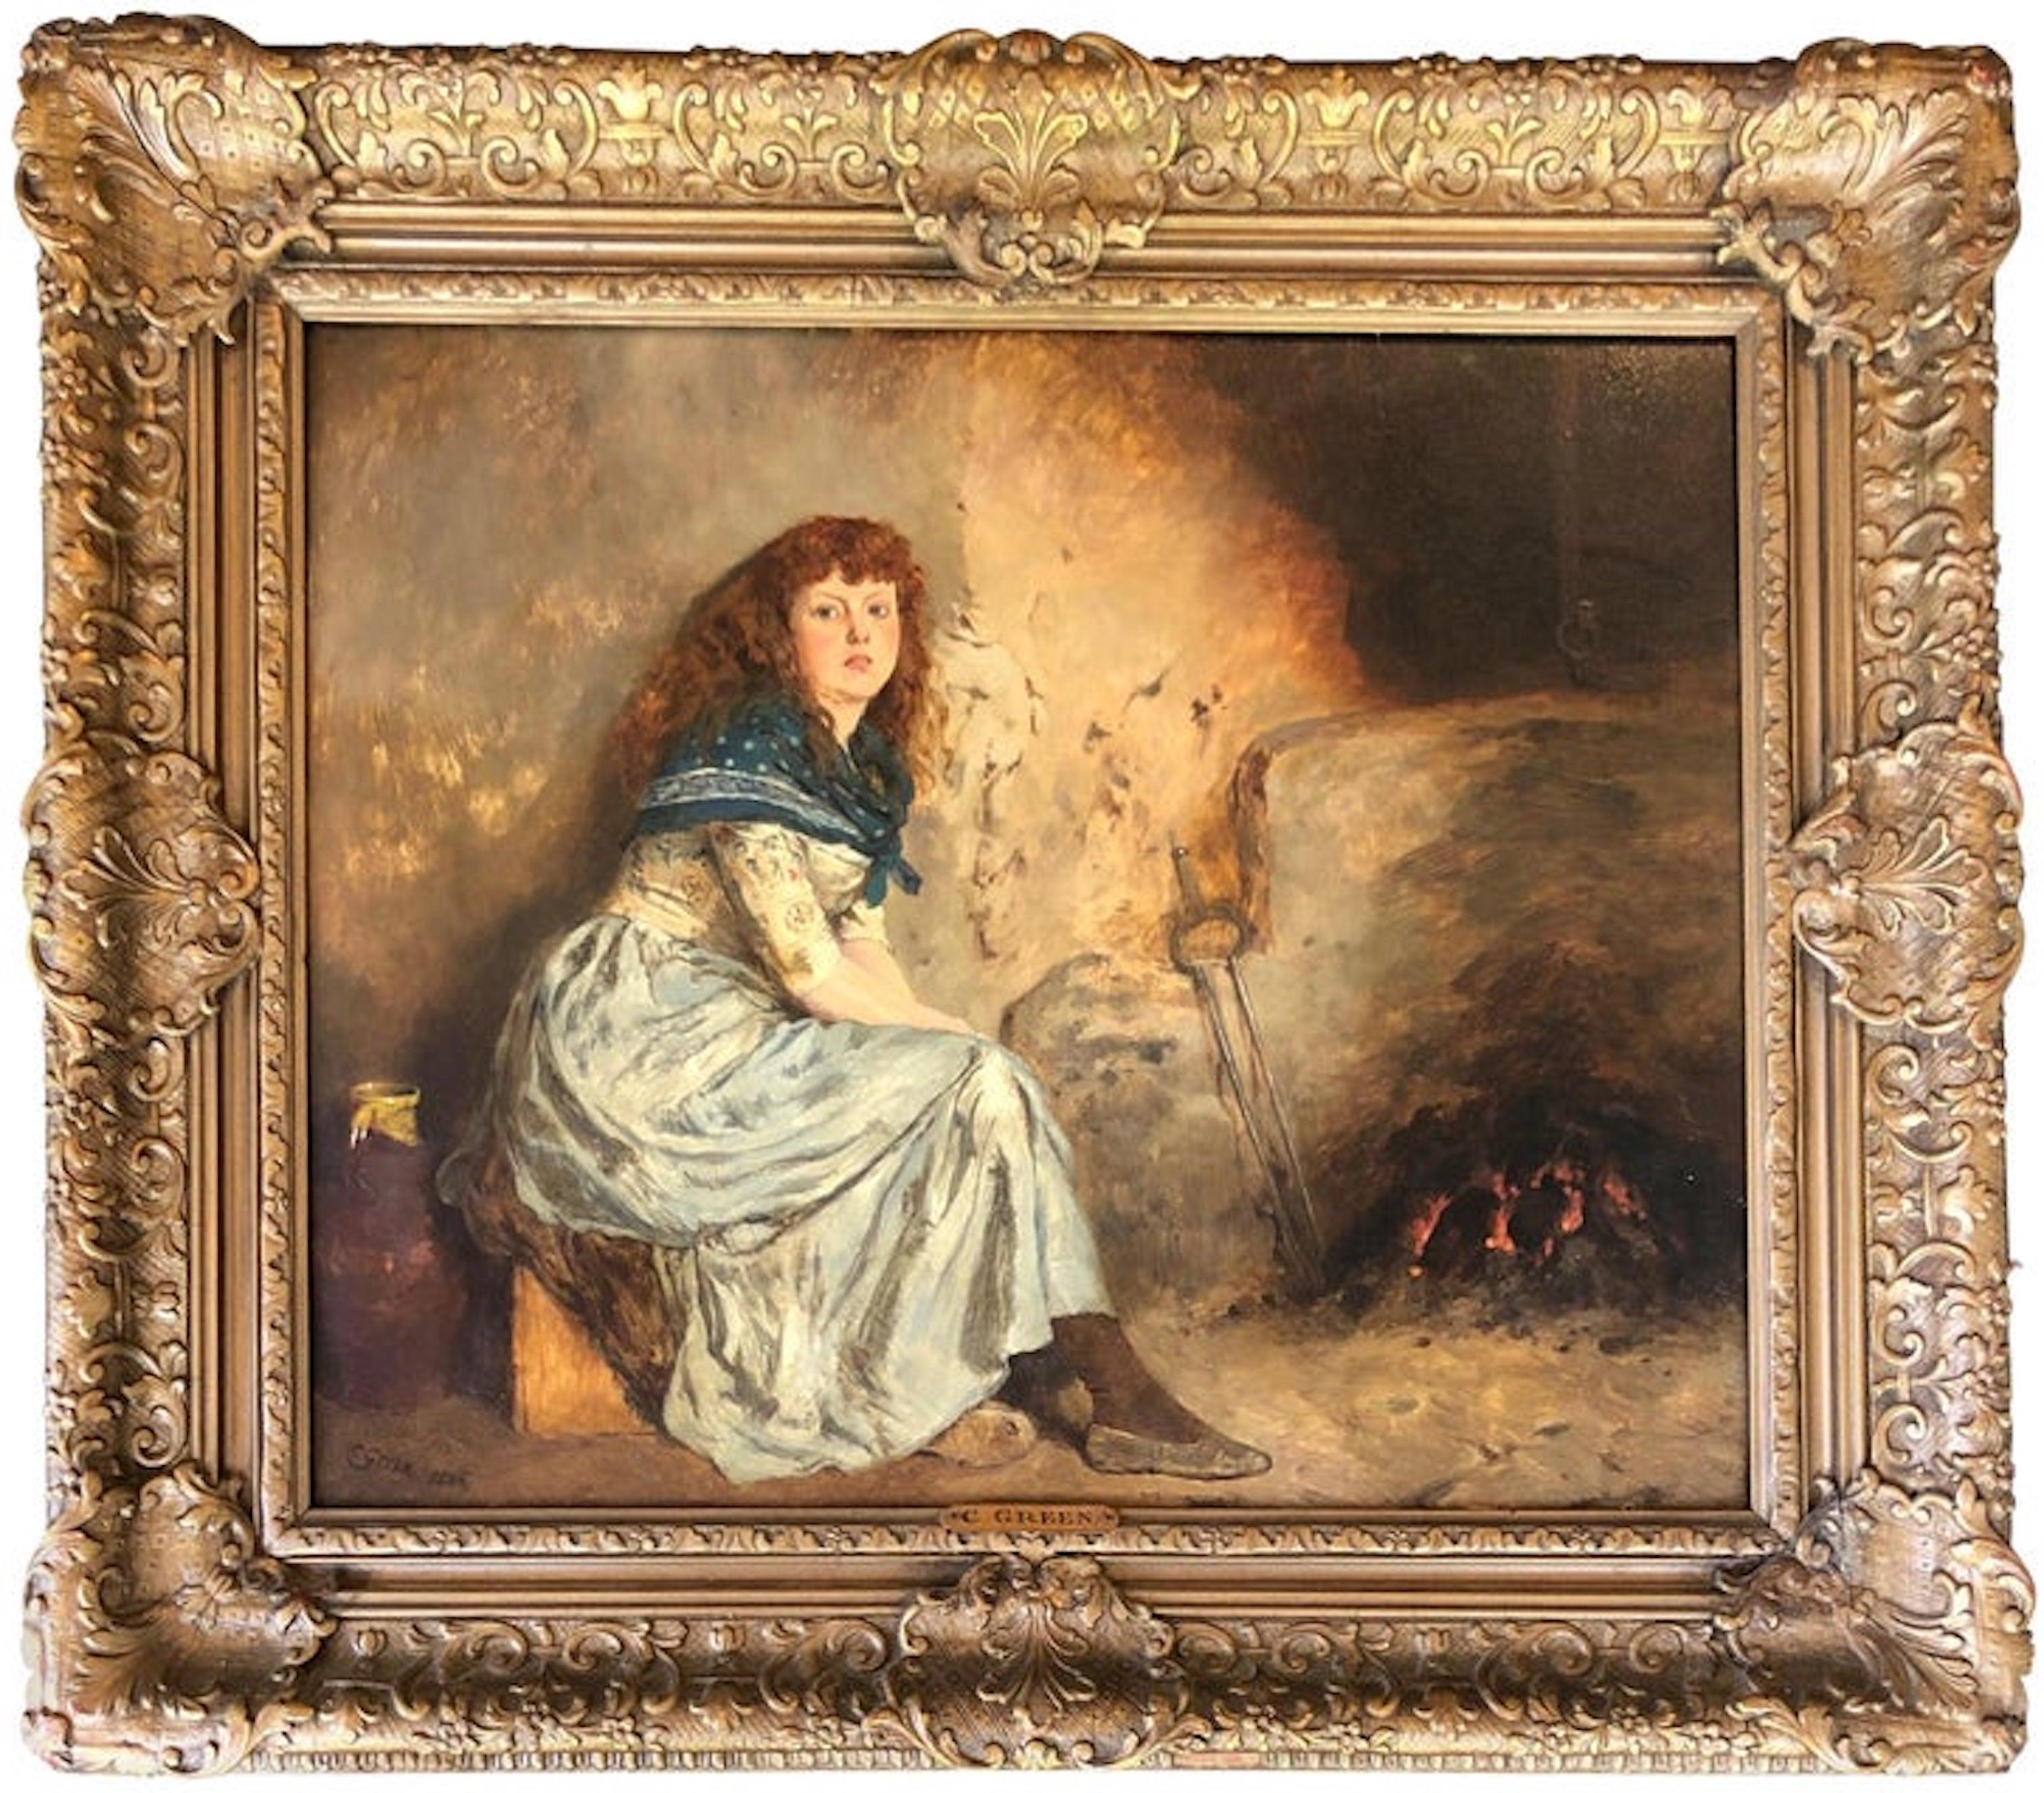 Charles Green Figurative Painting - Warming by the Fire